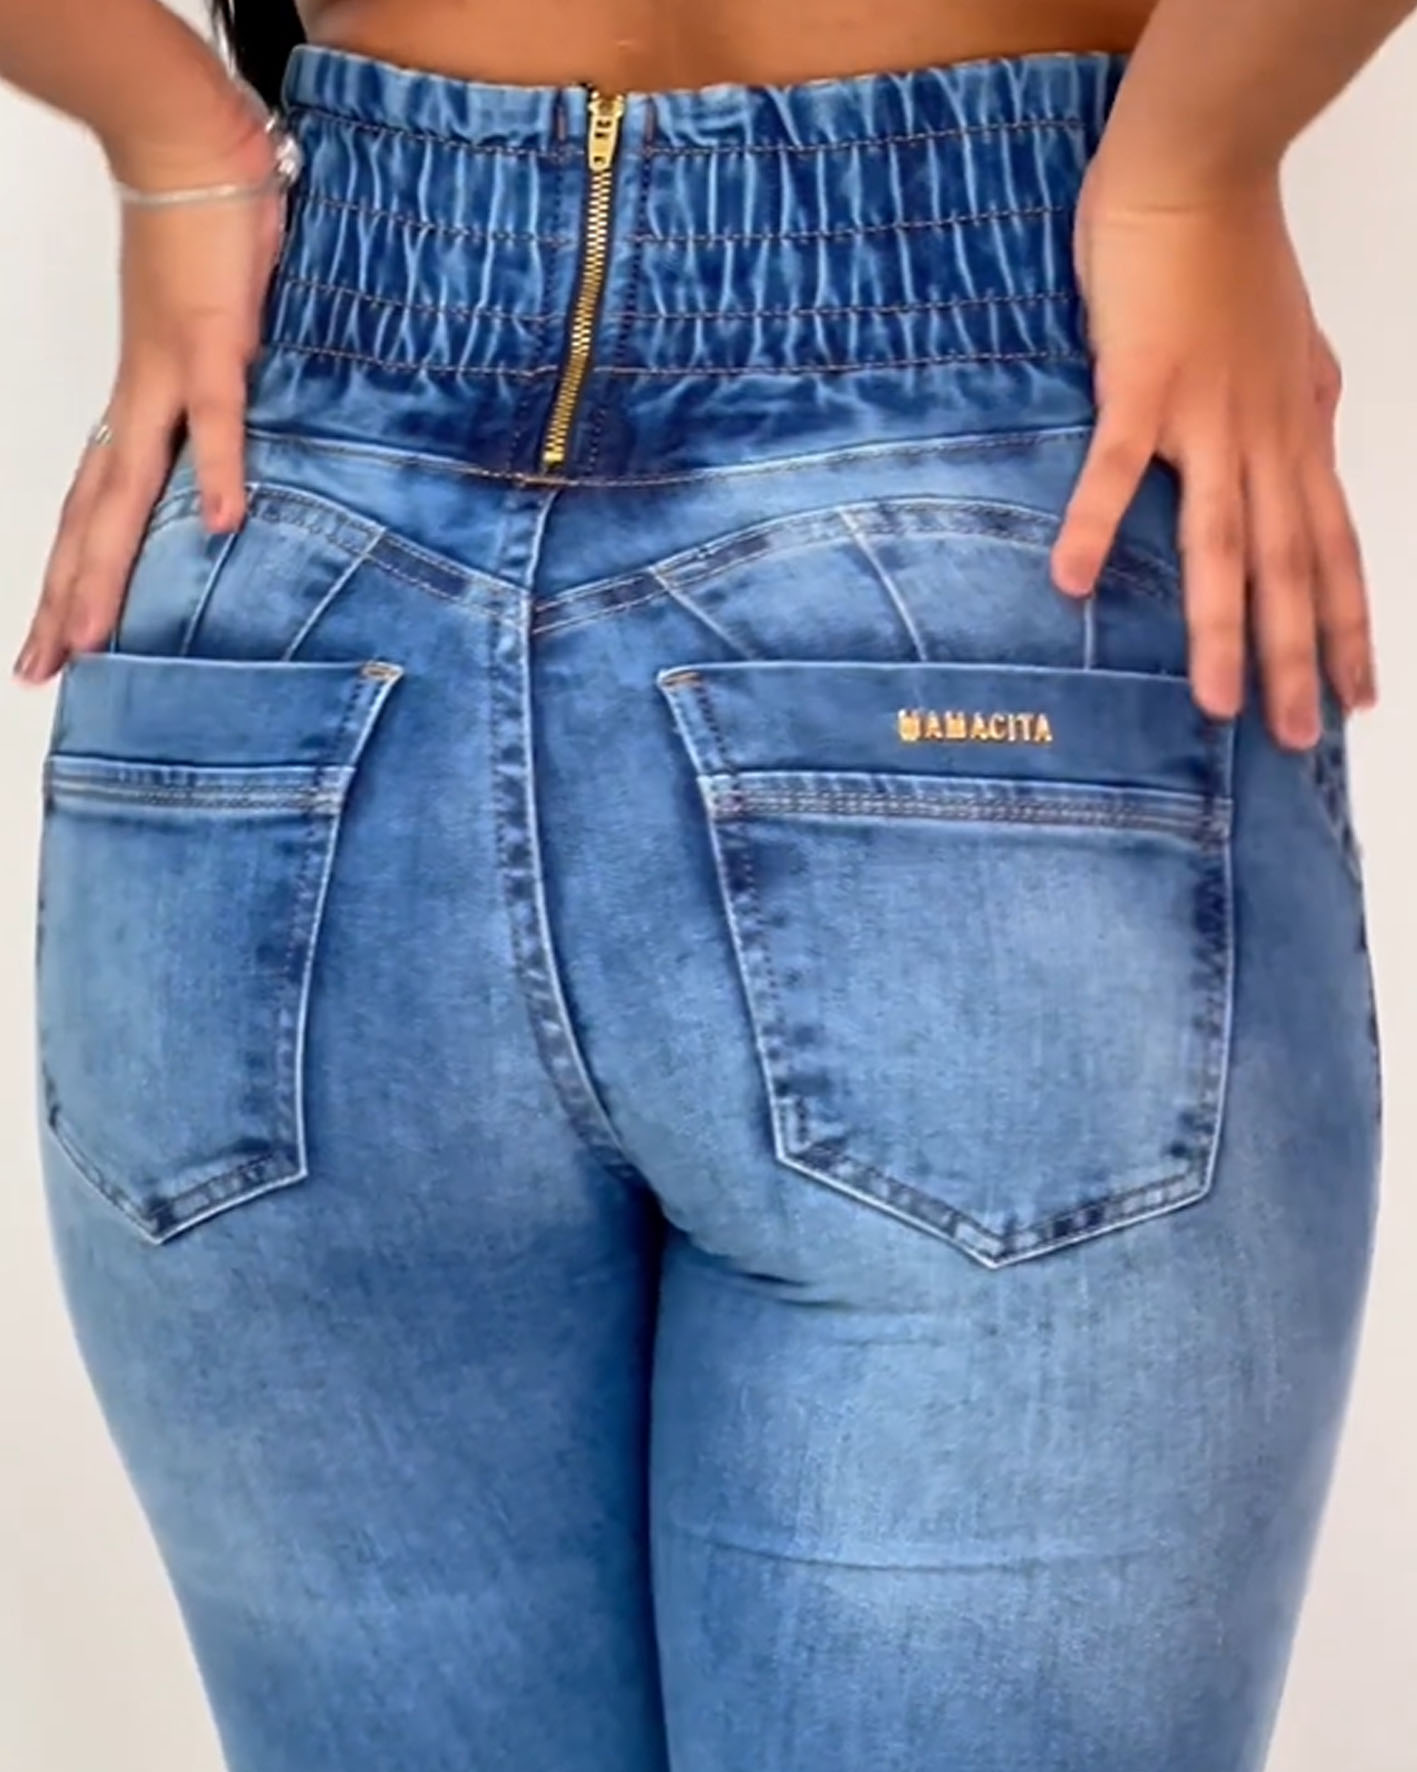 ChicCurve Zipper Toning Jeans with Hip Lift Denim Jeans